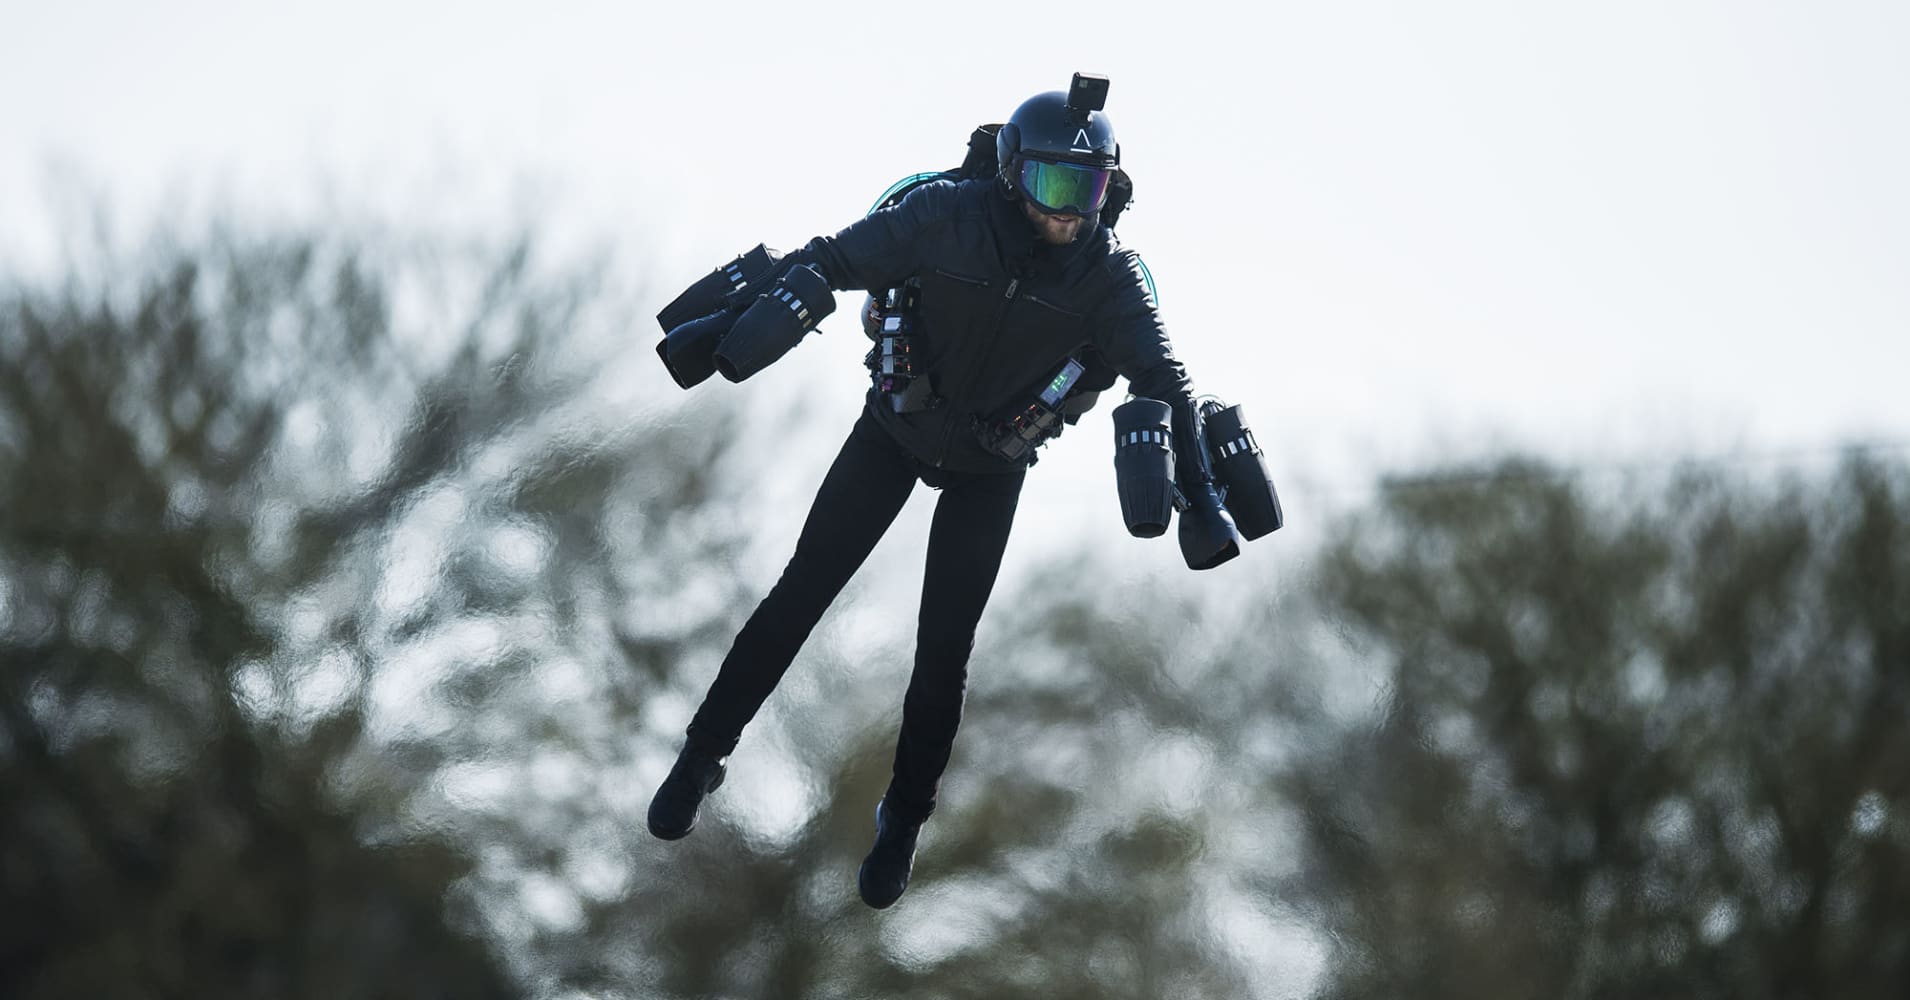 I got to test drive a $440,000 flying Gravity Jet Suit